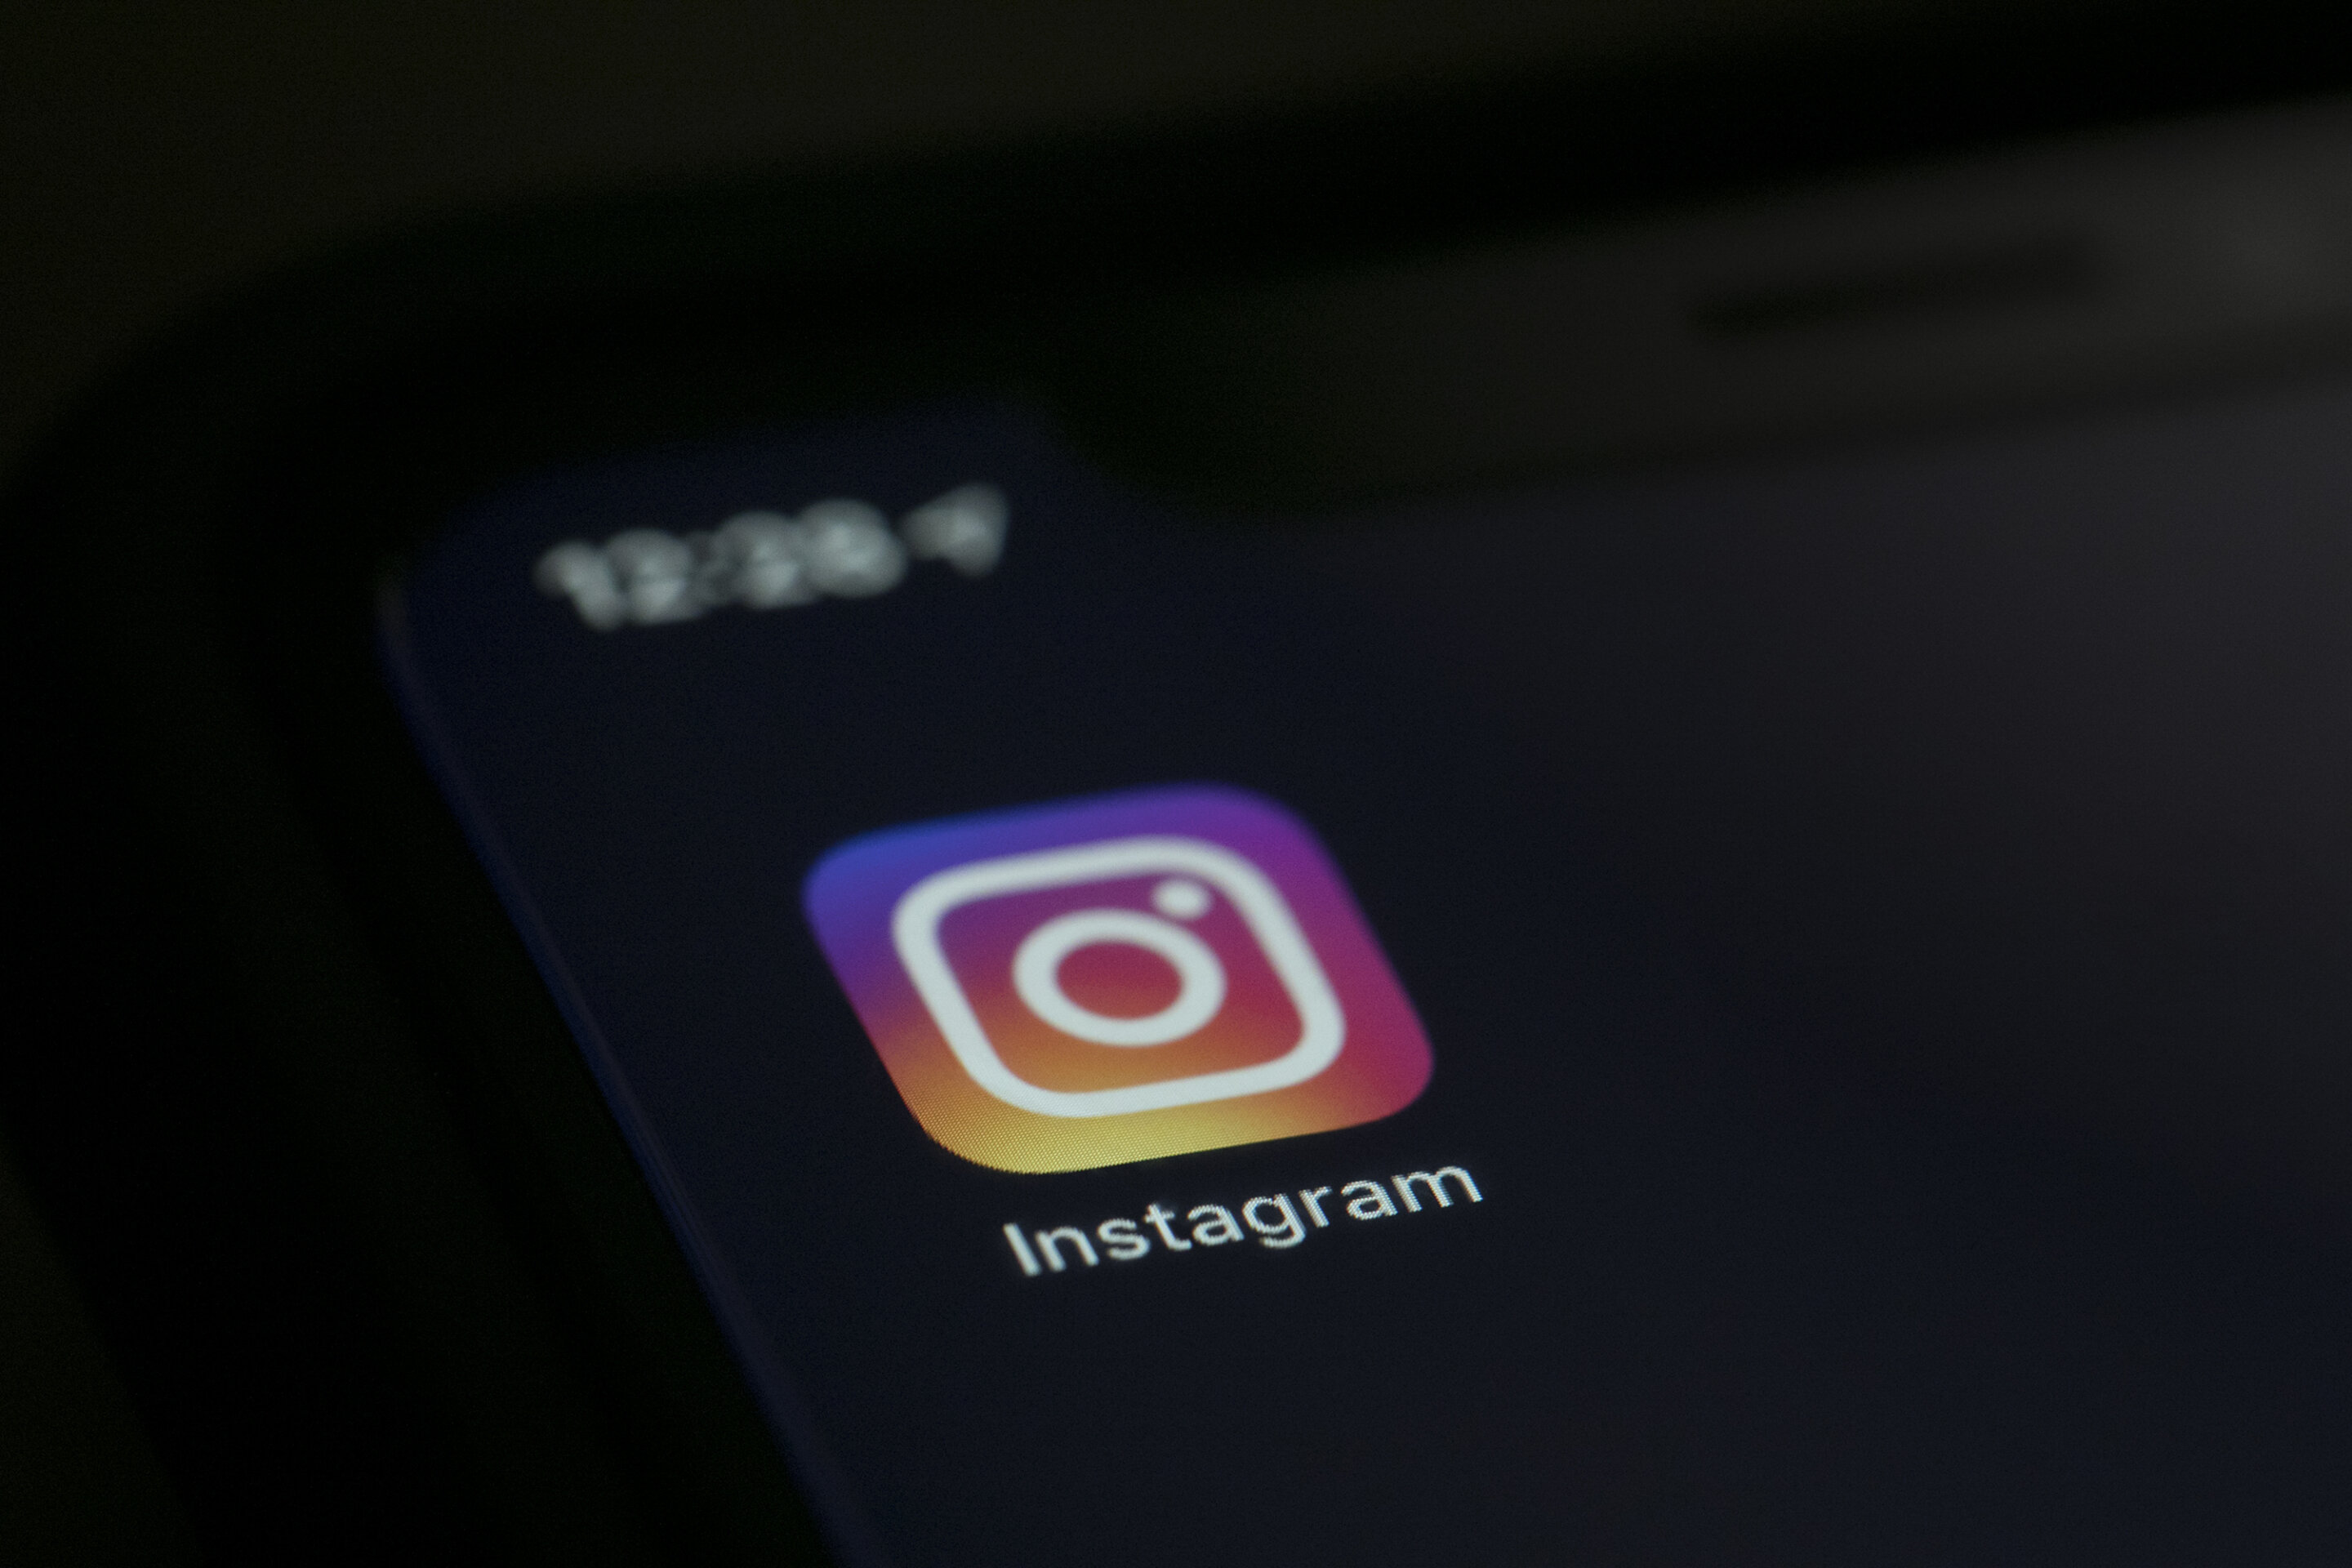 #Instagram hides some posts that mention abortion